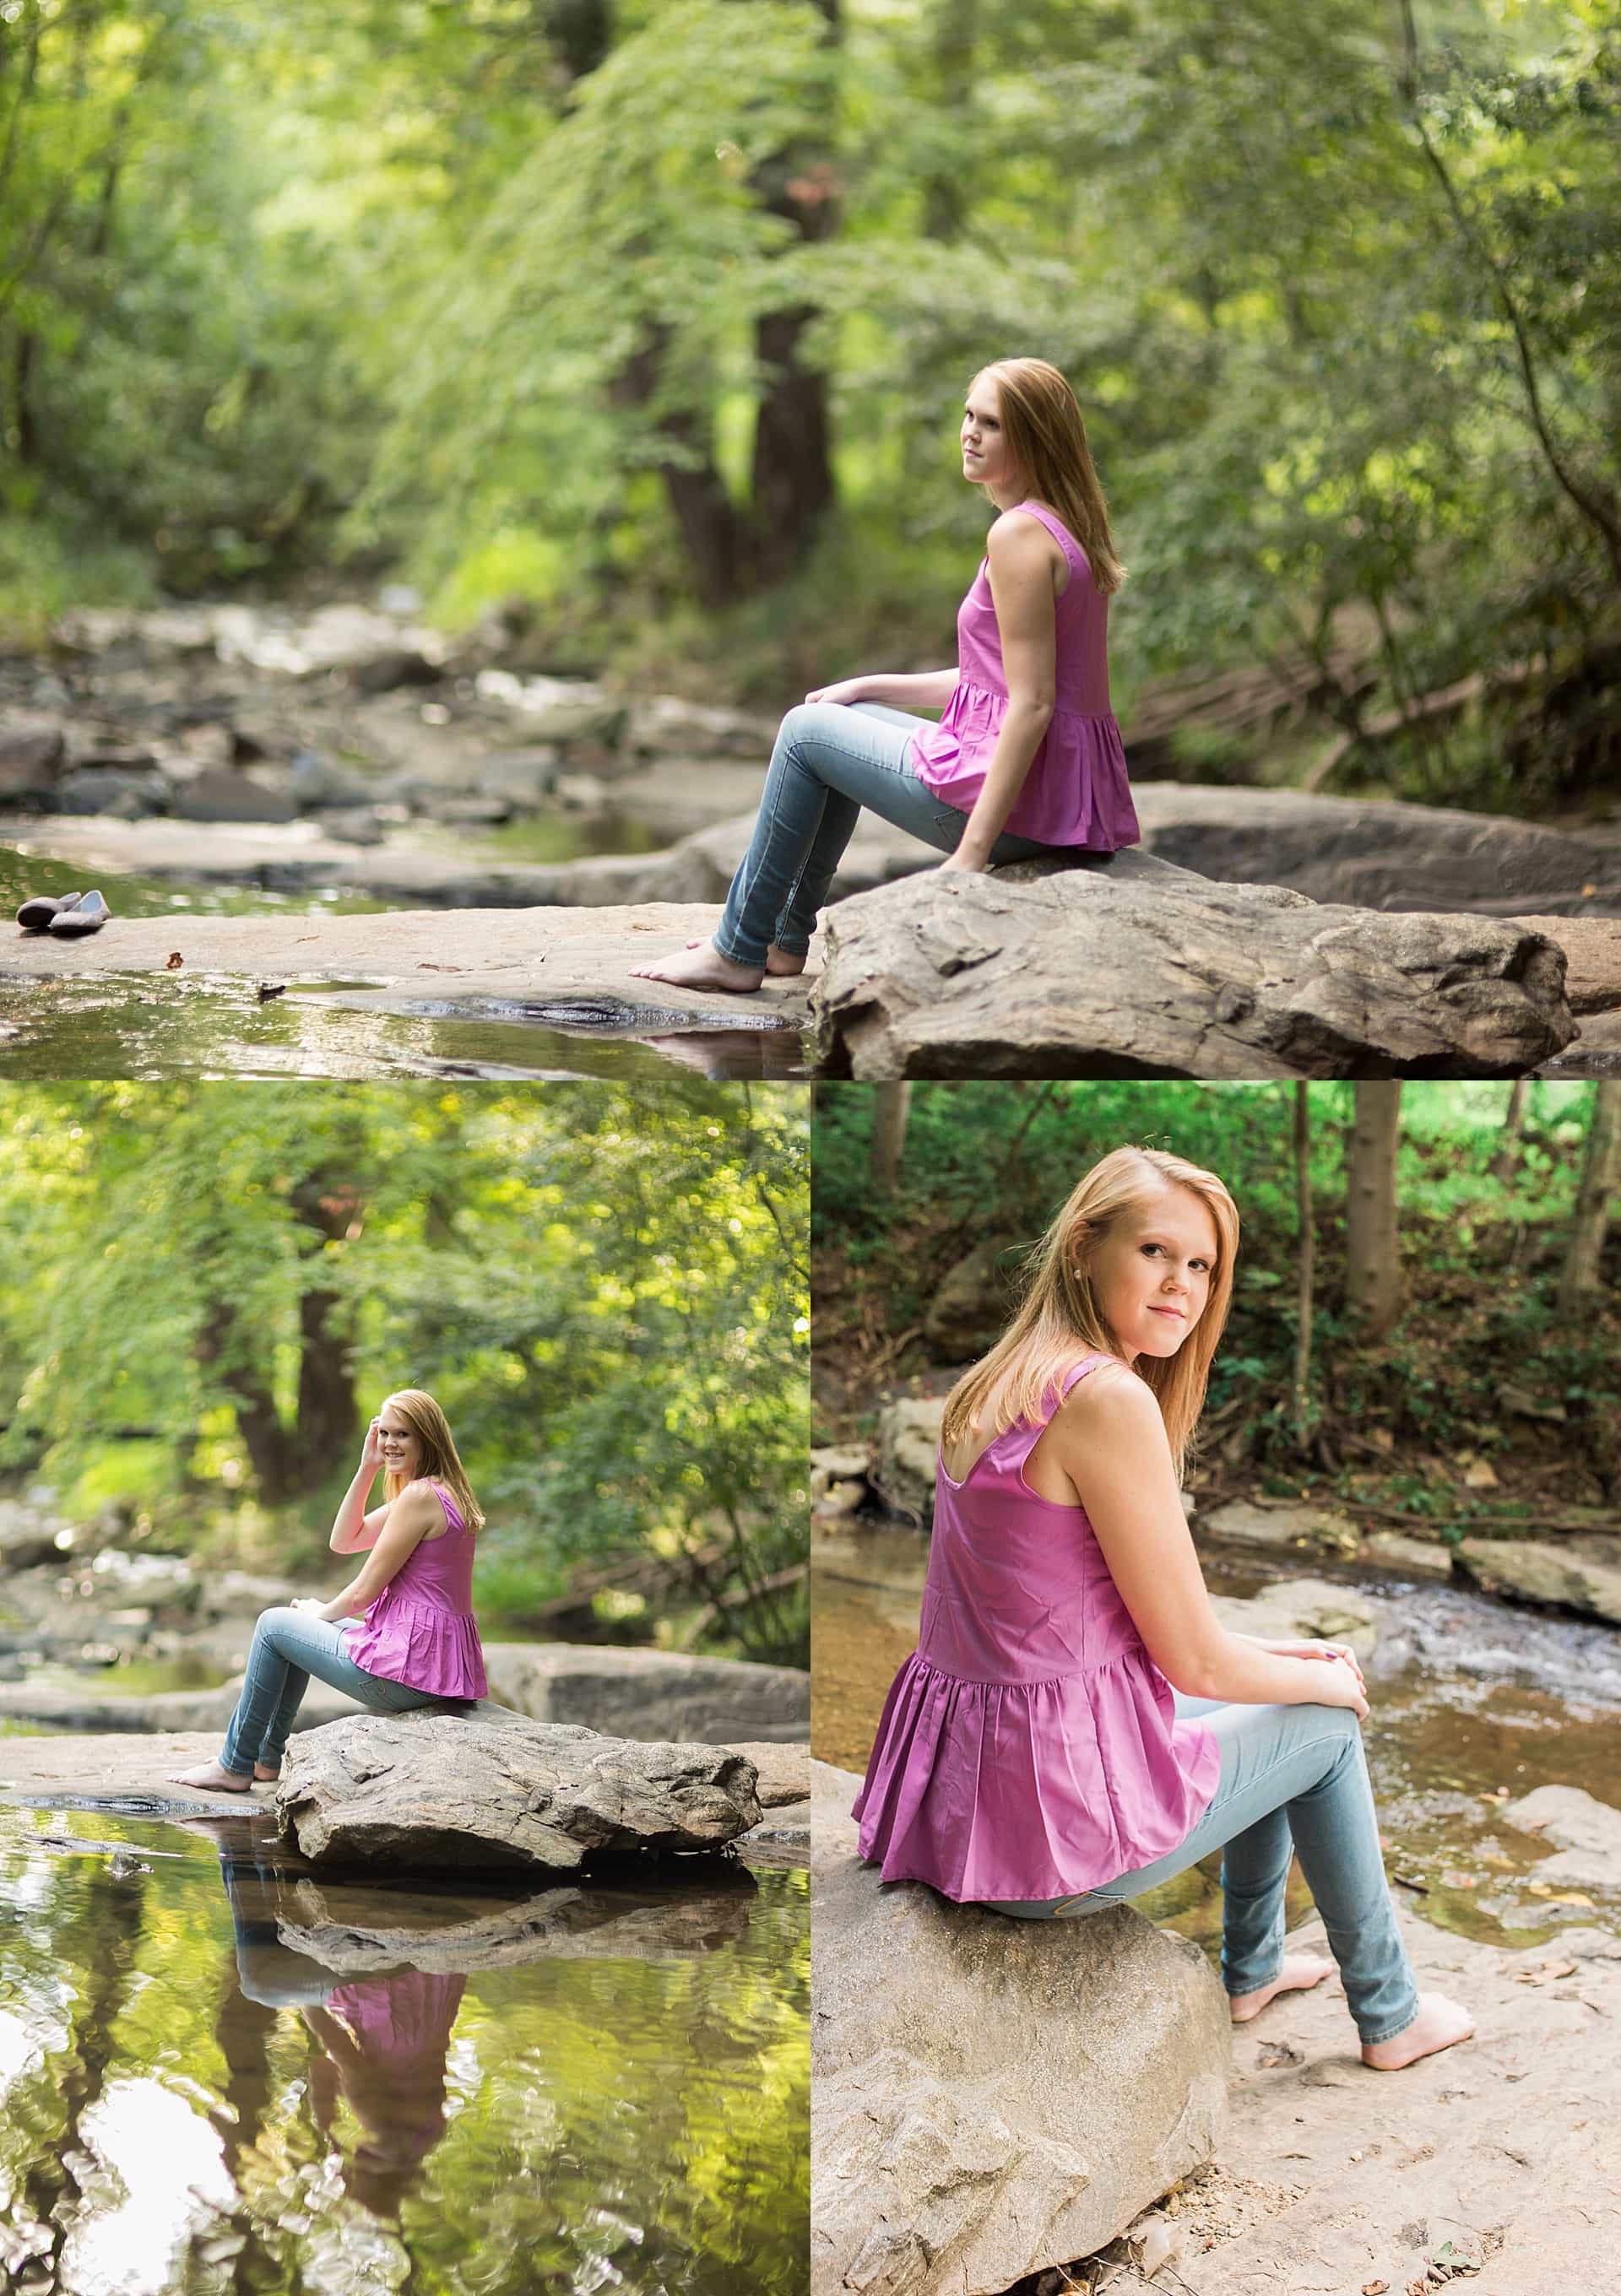 Senior in pink shirt and jeans at creek